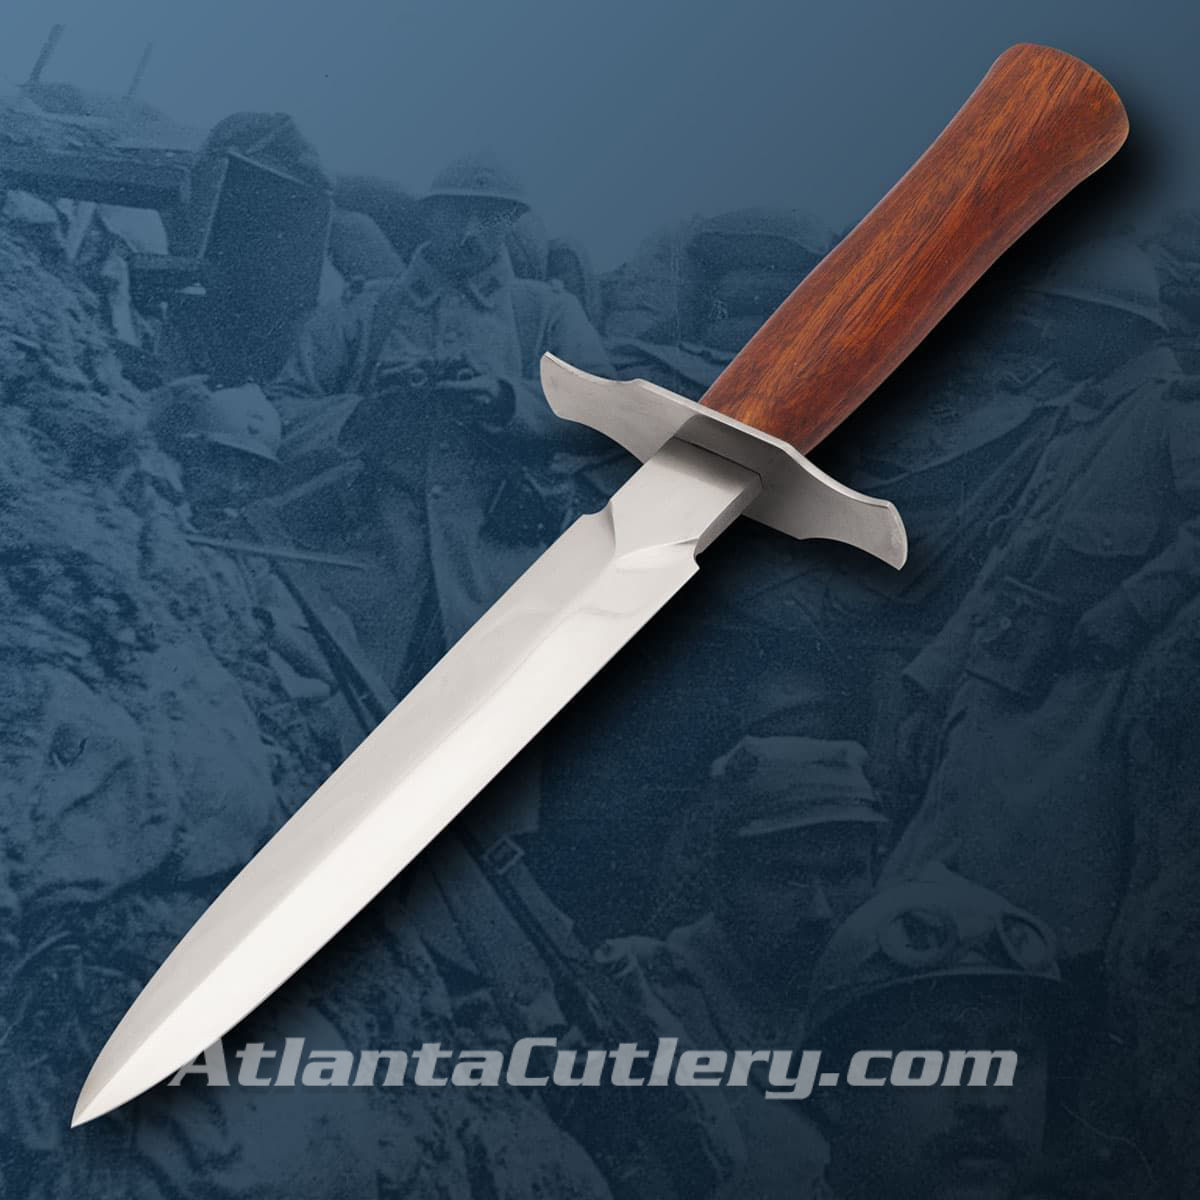 blade design of French dagger Avenger of 1870 inspired the US M1918 Trench Knife with style used into WWII